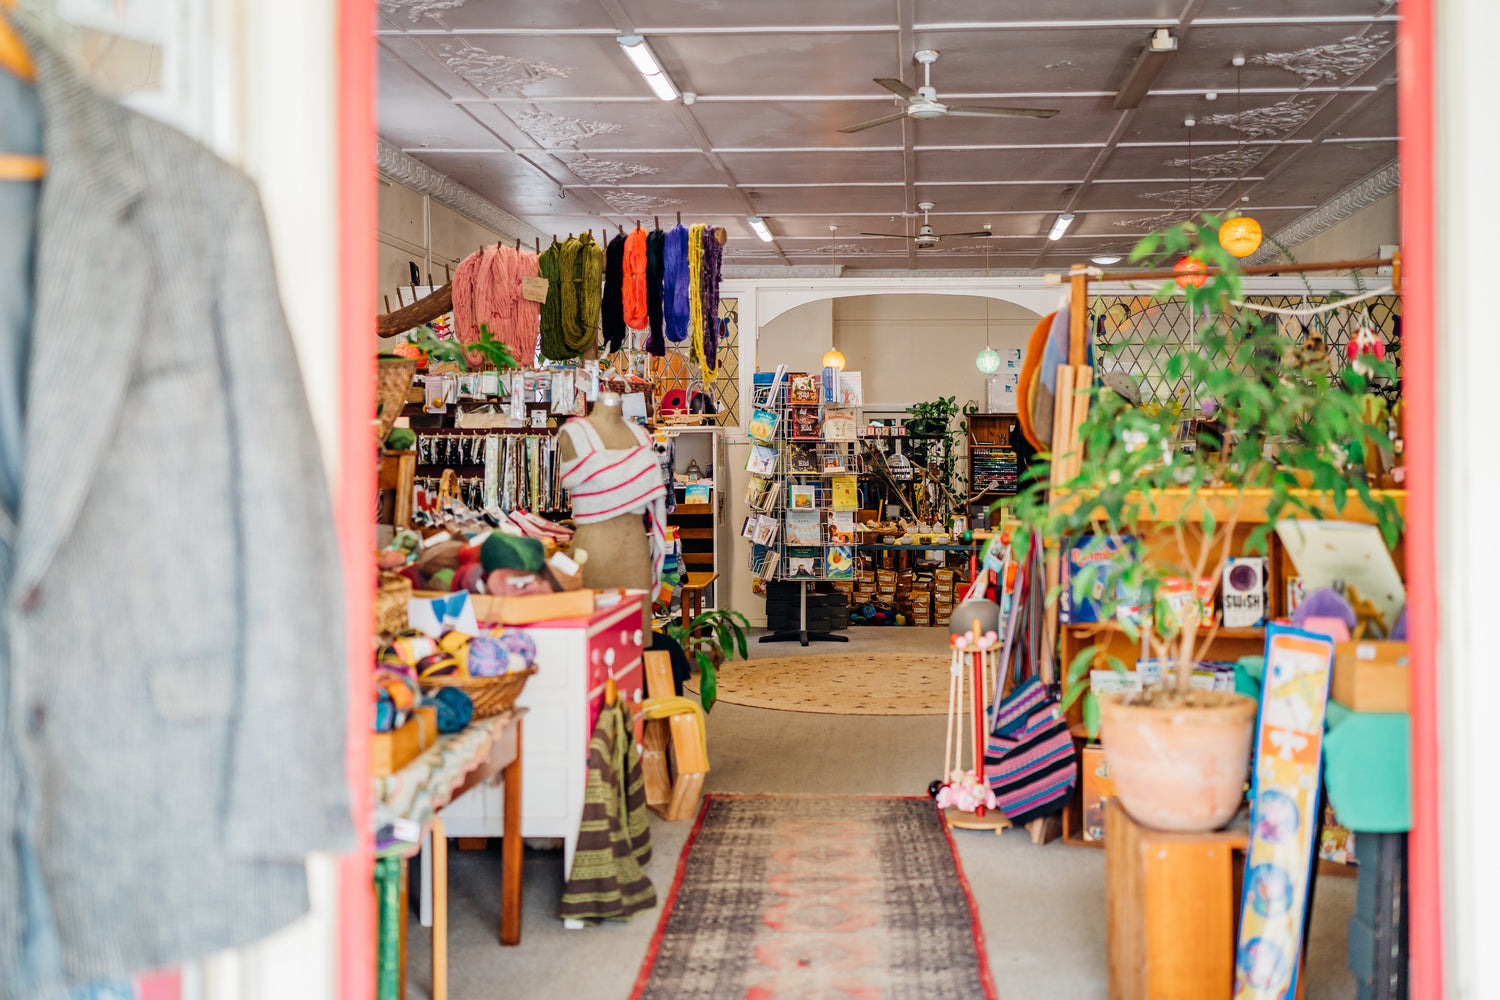 Walking through the door of the weave shop colourful yarns to the left and children's toys and craft to the right